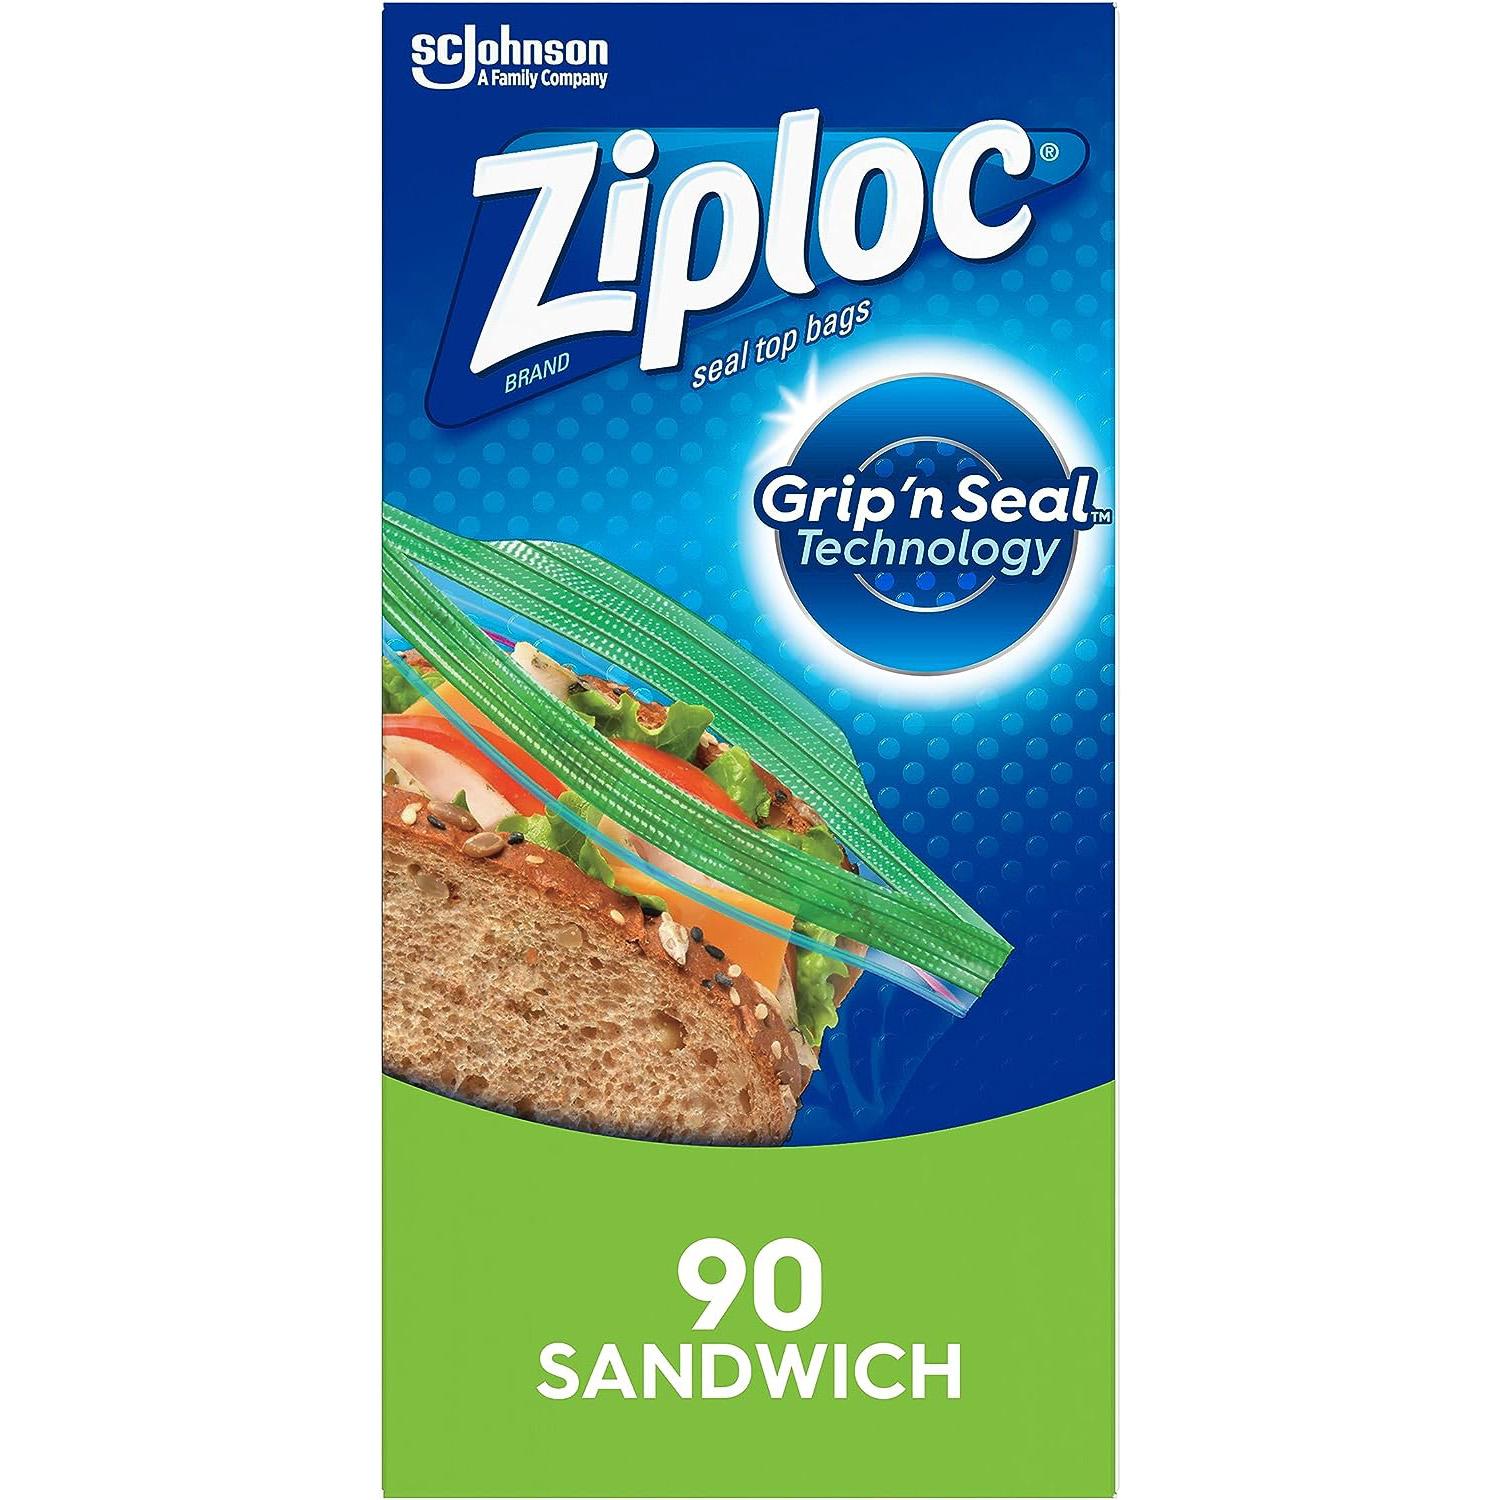 Ziploc Sandwich and Snack Bags 90 Pack for $2.99